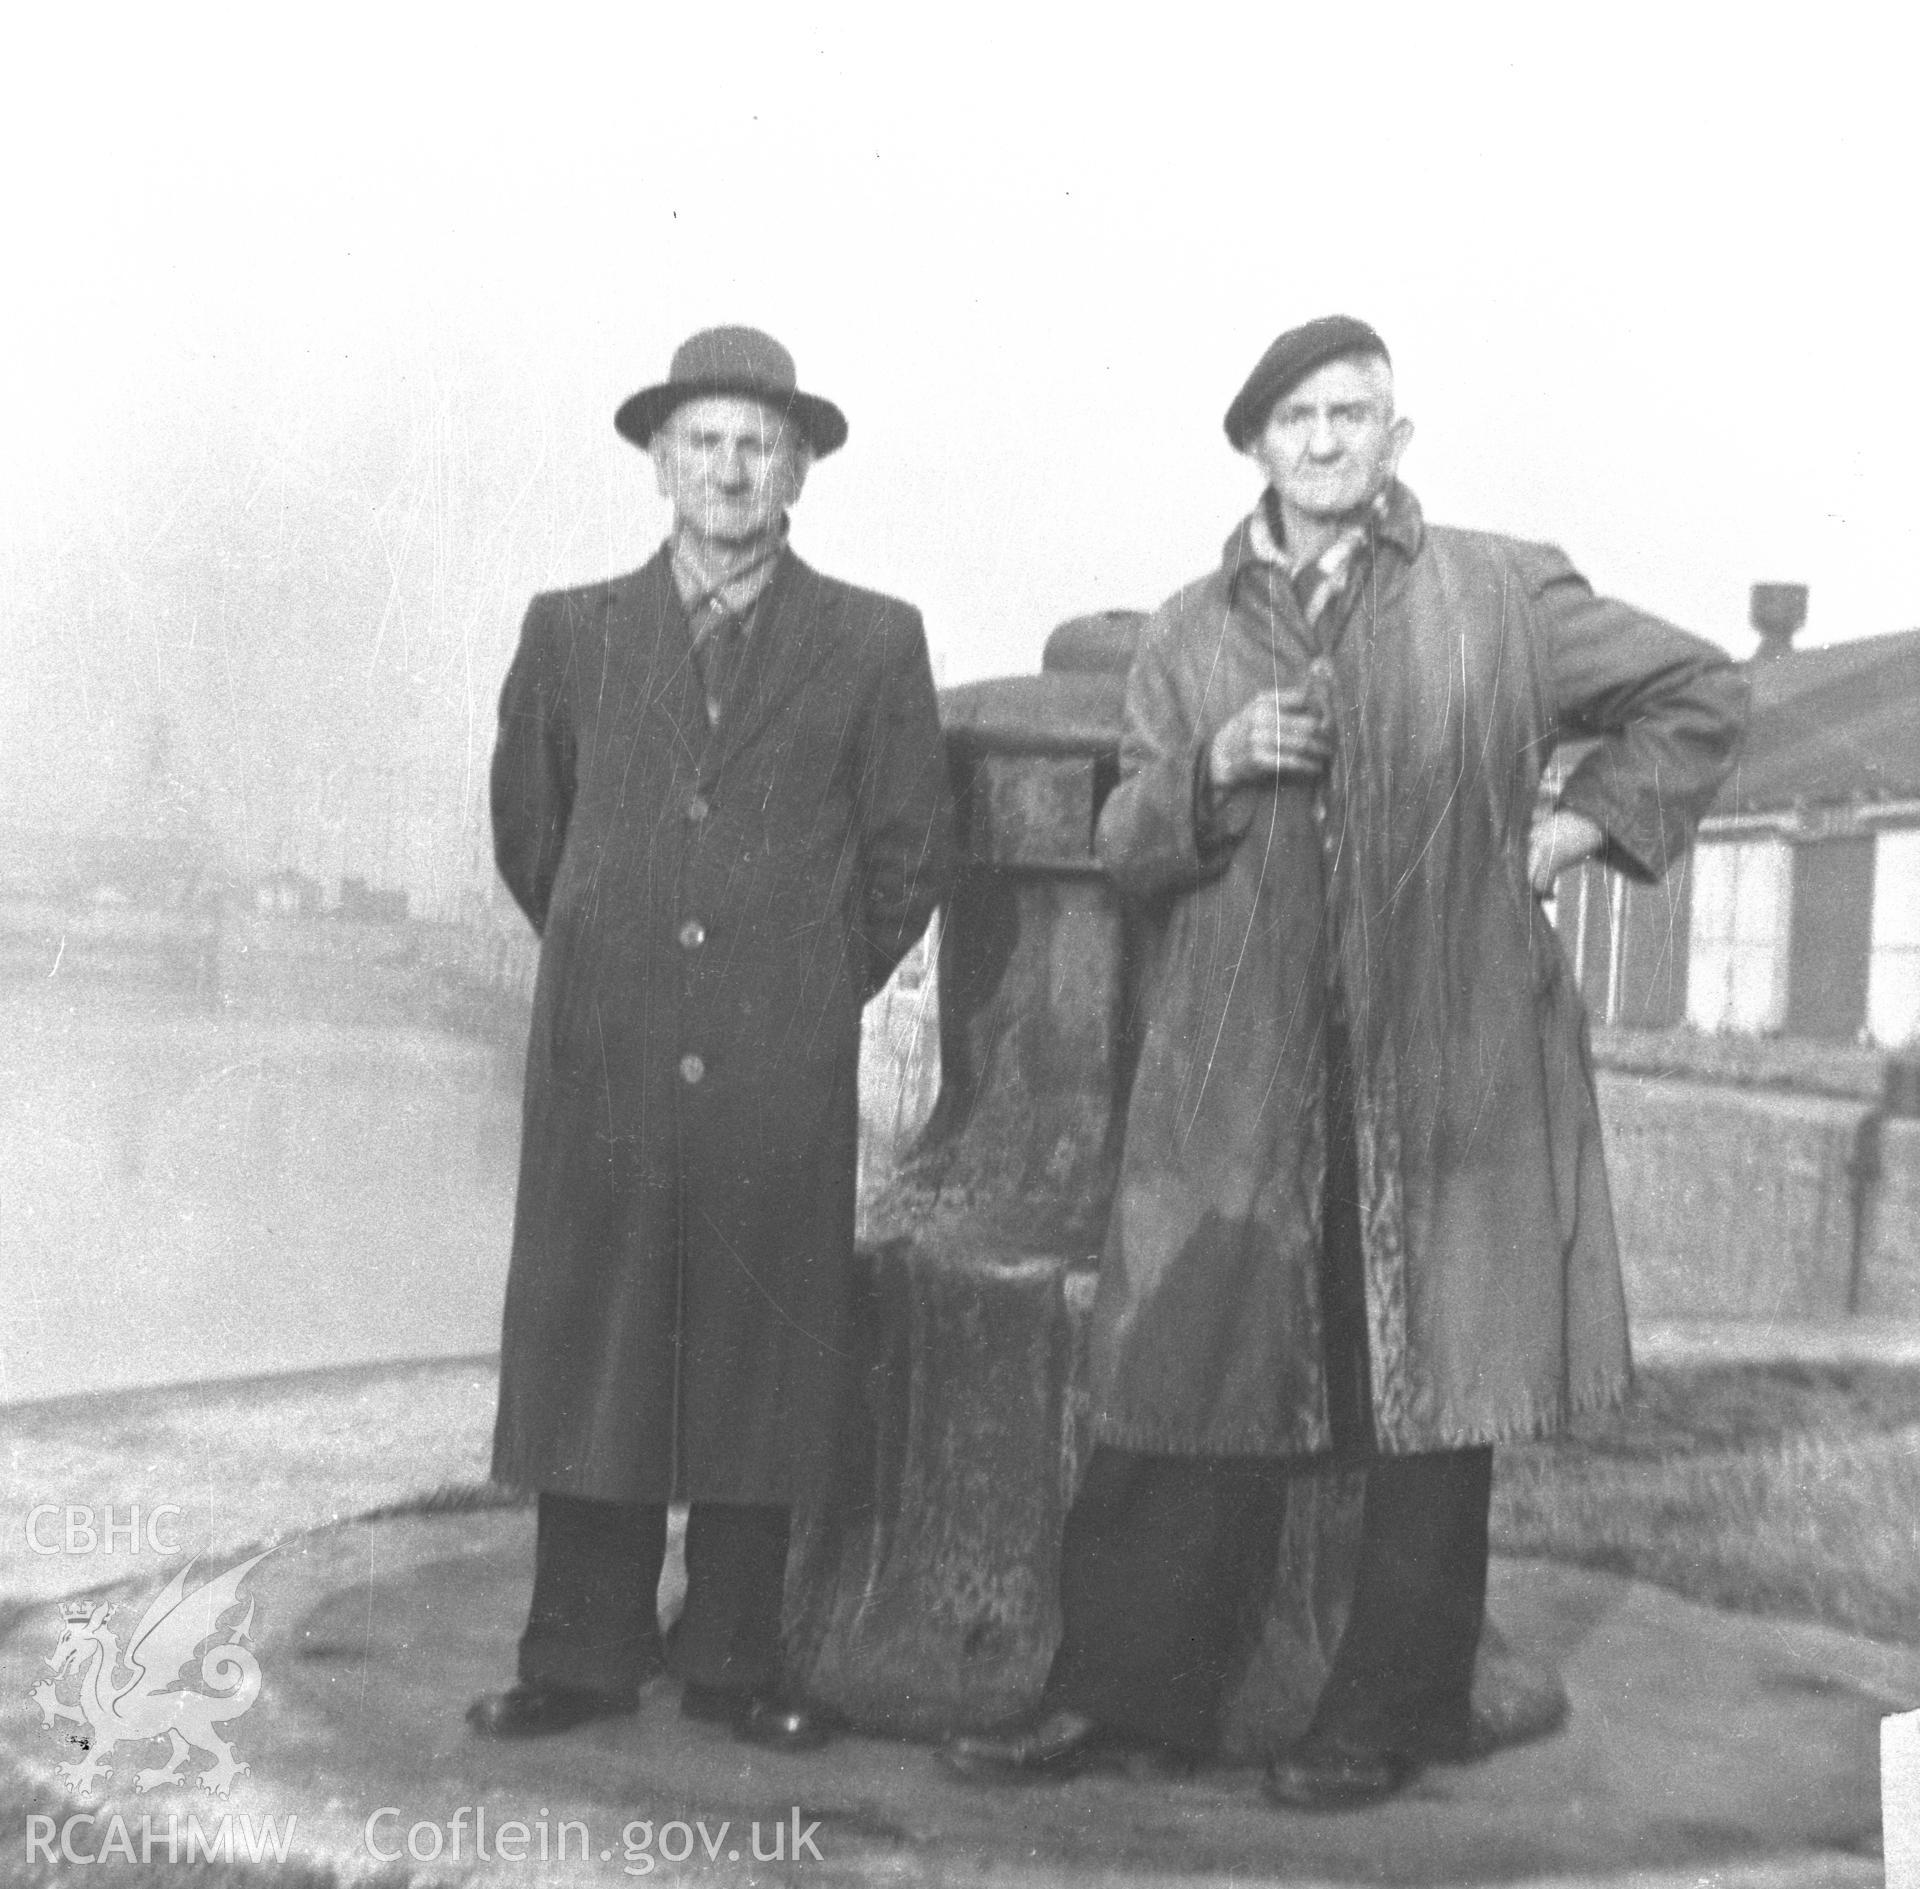 Black and white acetate negative showing two figures in Llanelli Docks.